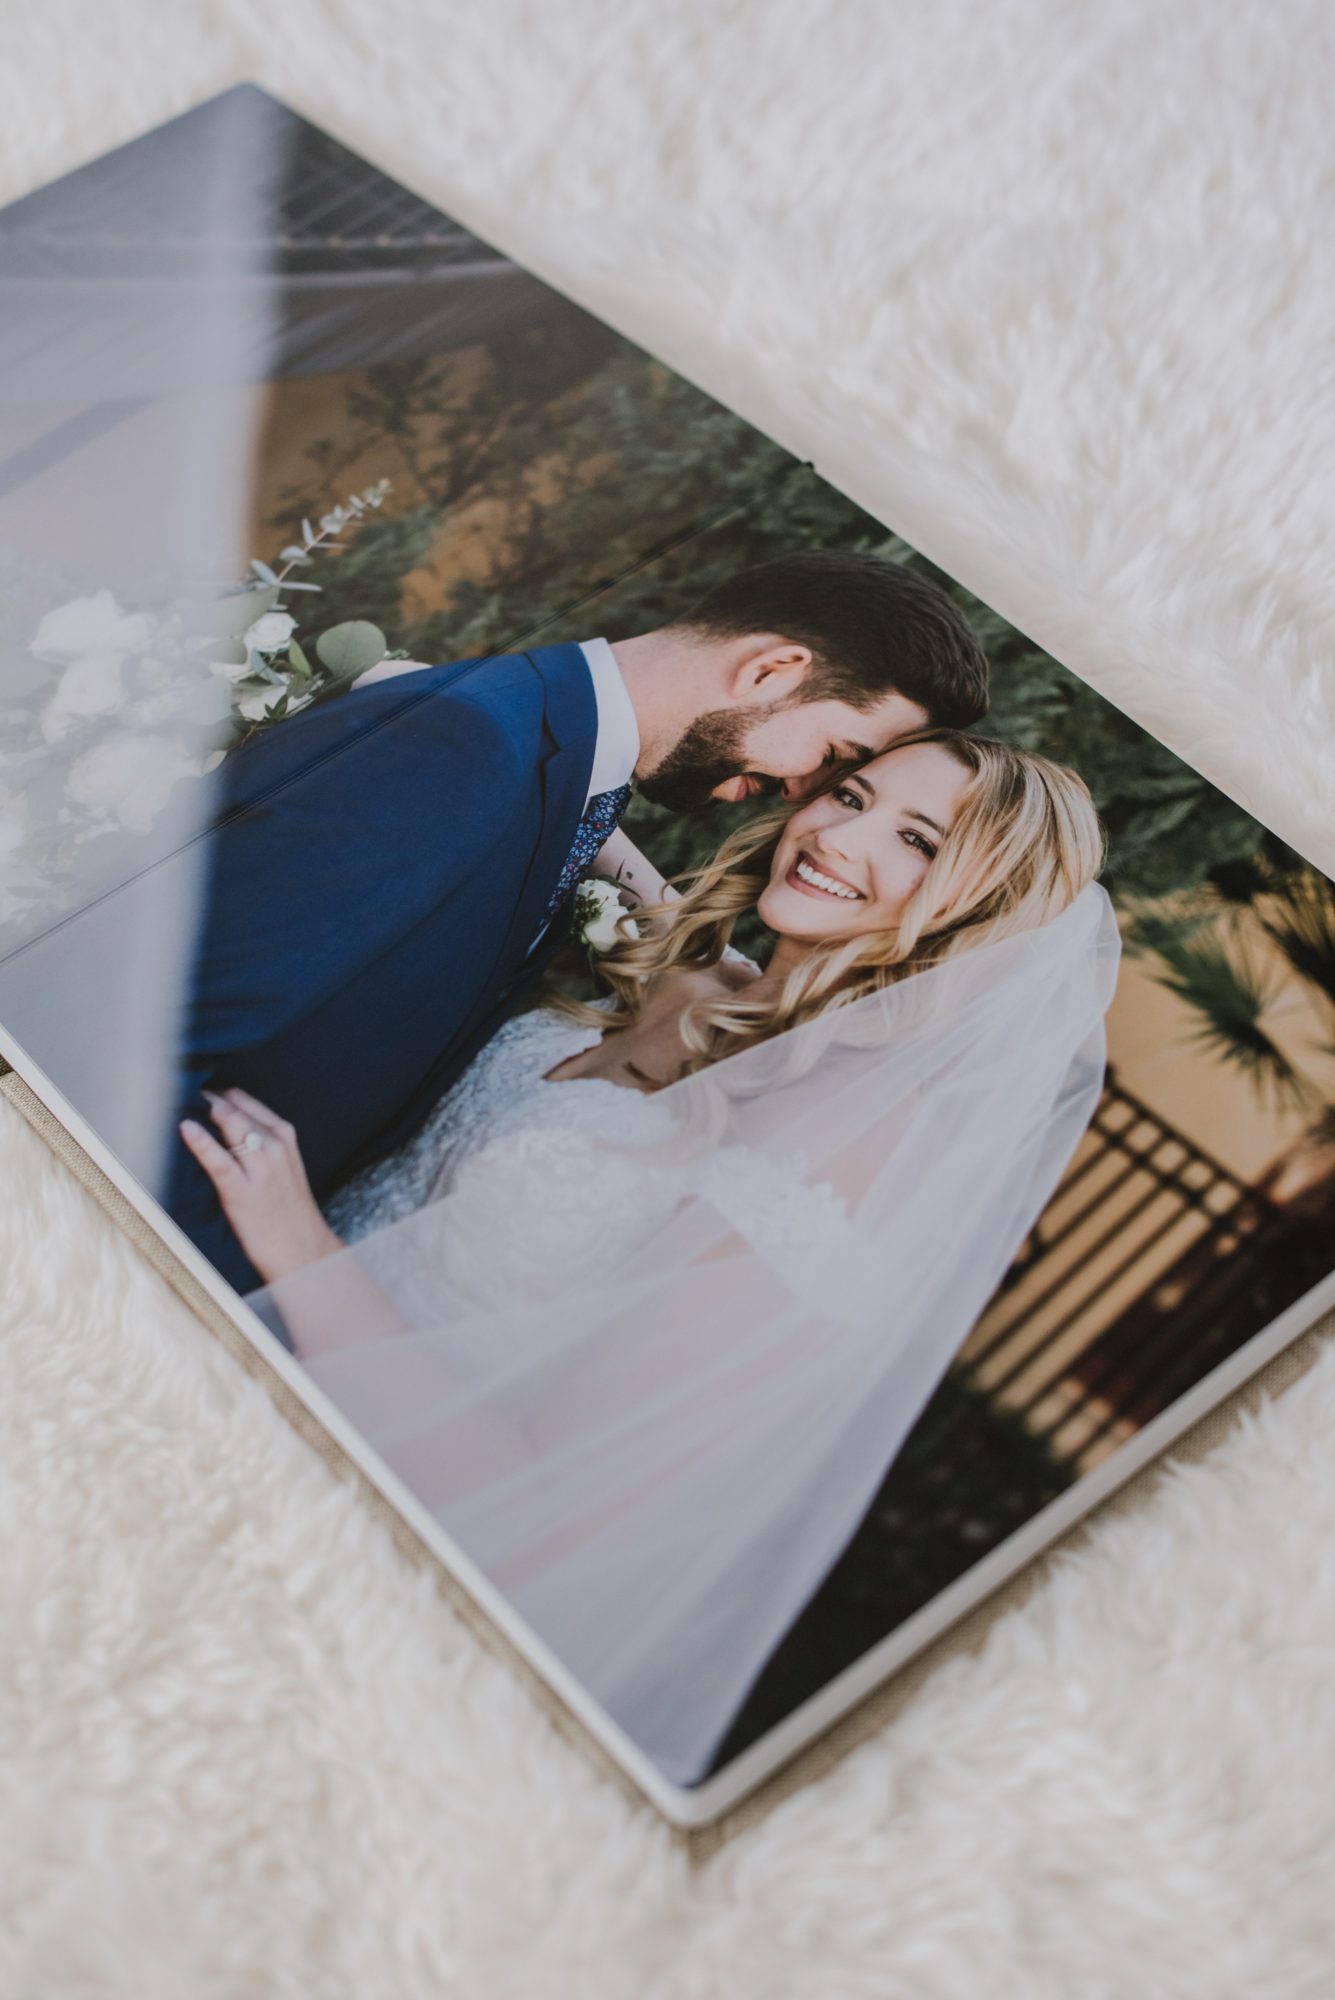 Why should I invest in a wedding album and wall art? Nikkels Photography